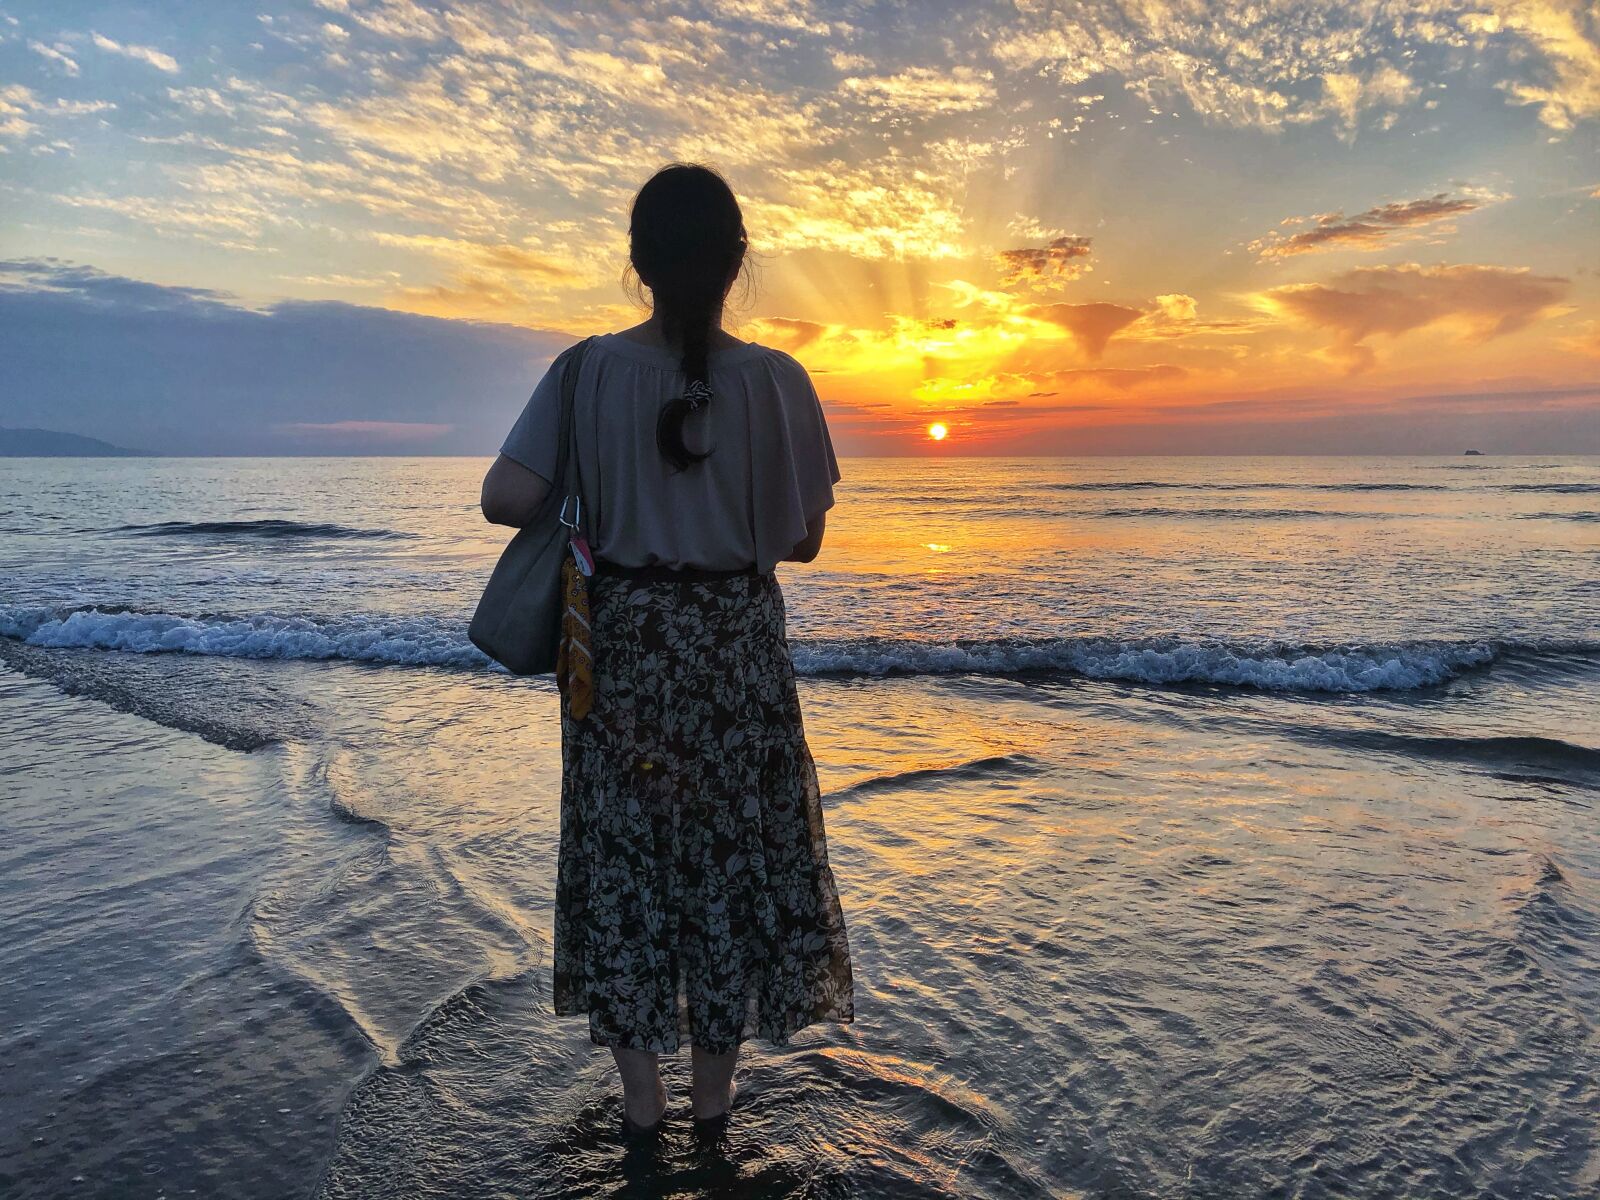 Apple iPhone 8 Plus sample photo. Woman, sunset, silhouette photography